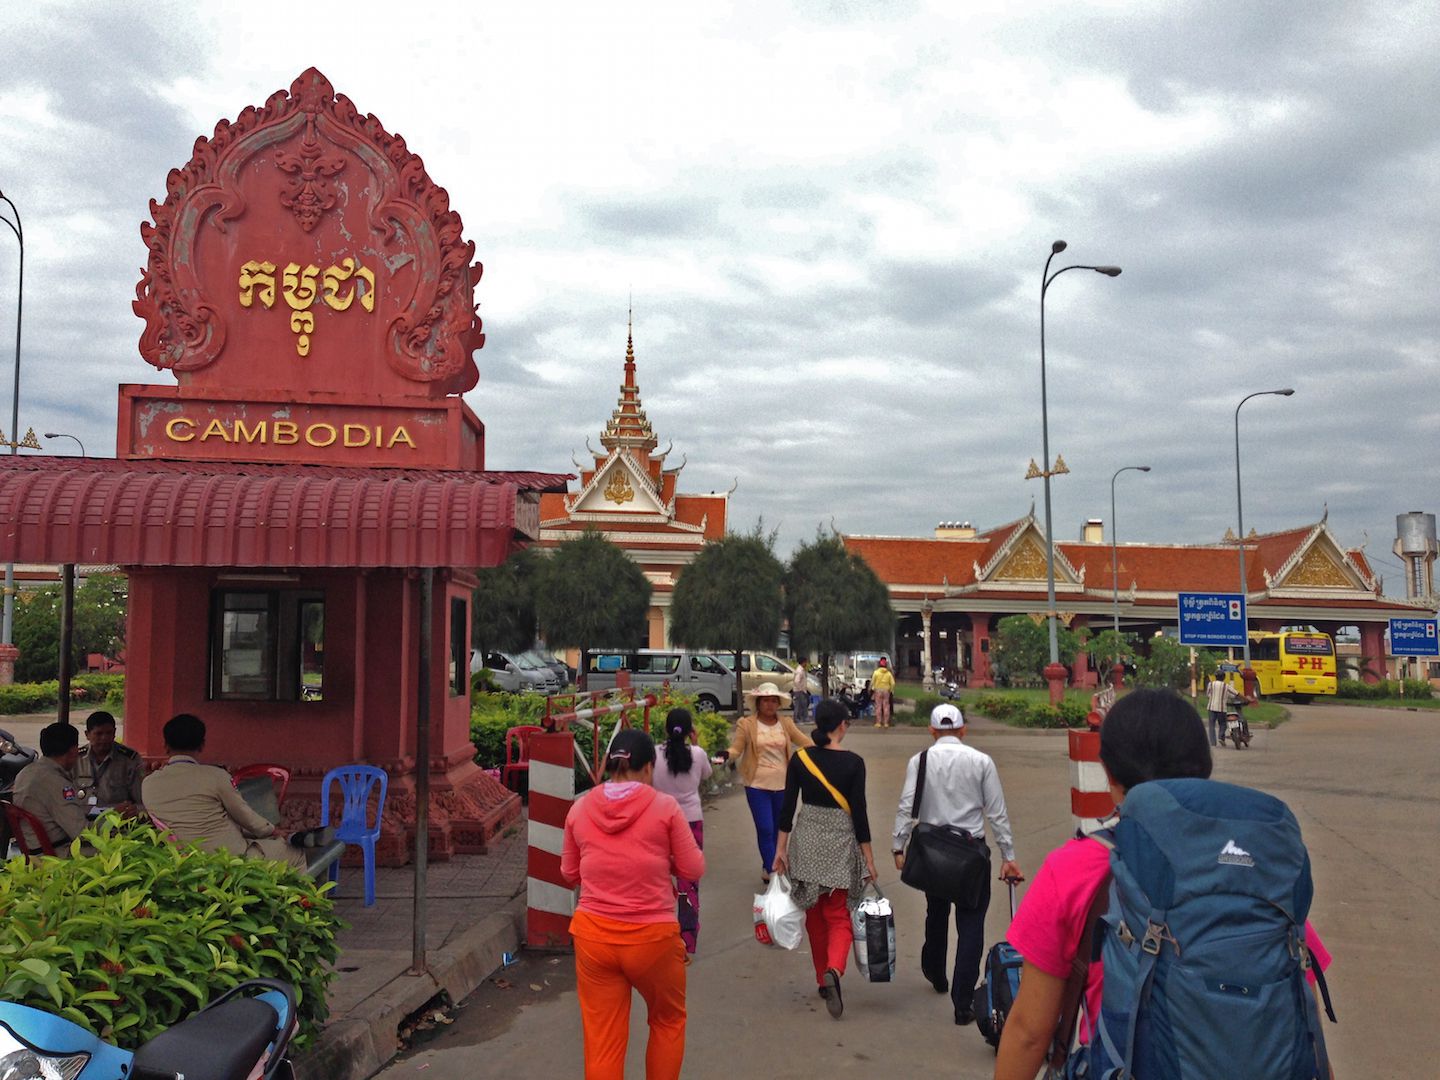 Stepping on Cambodian soil